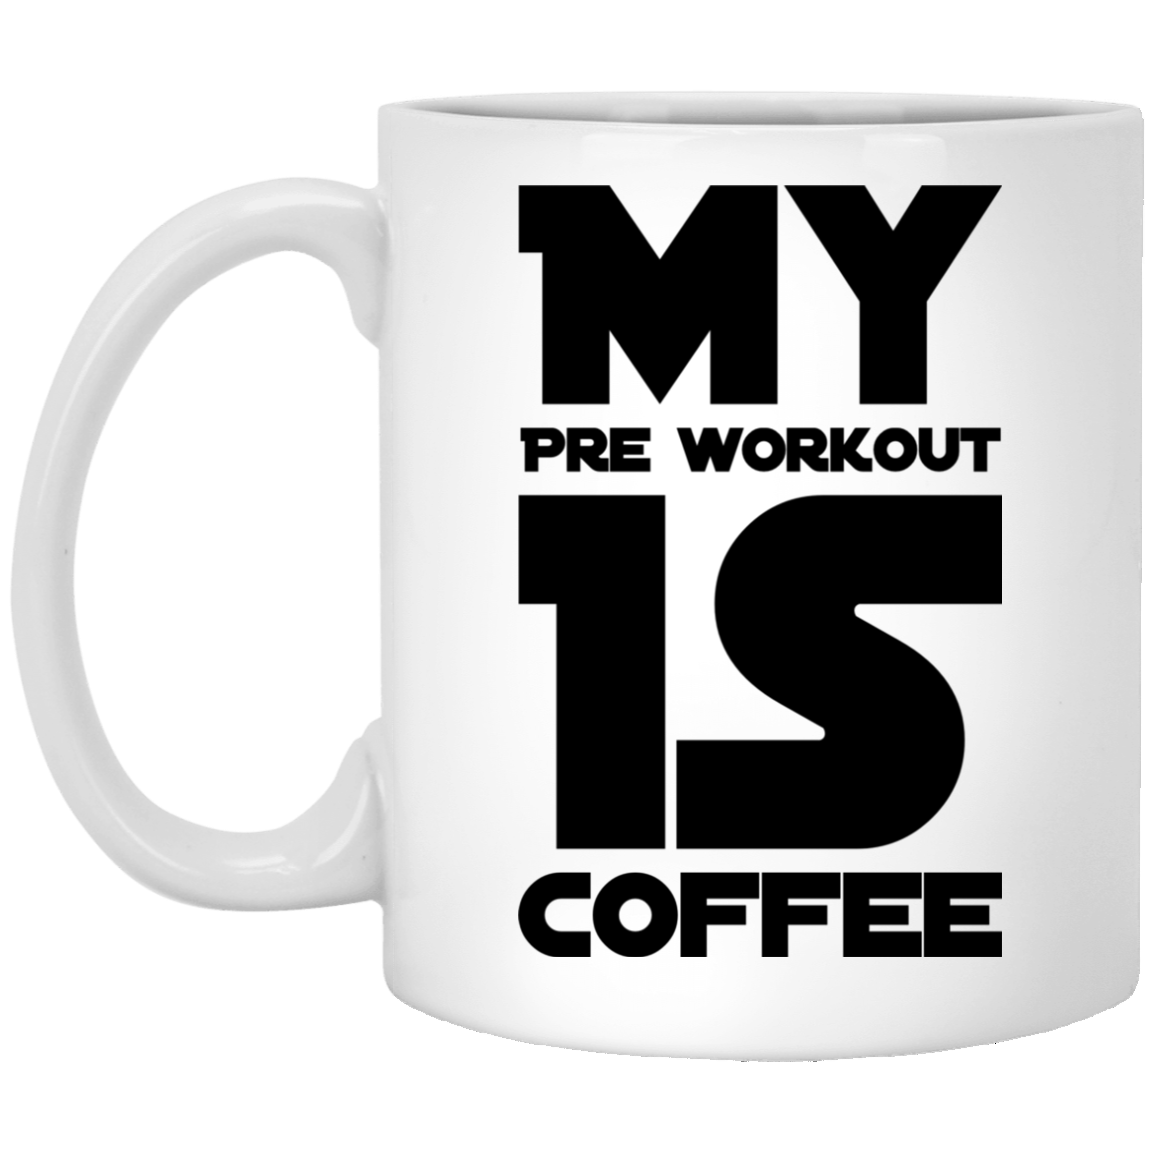 Coffee is my preworkout. It's not fancy but it does the trick!